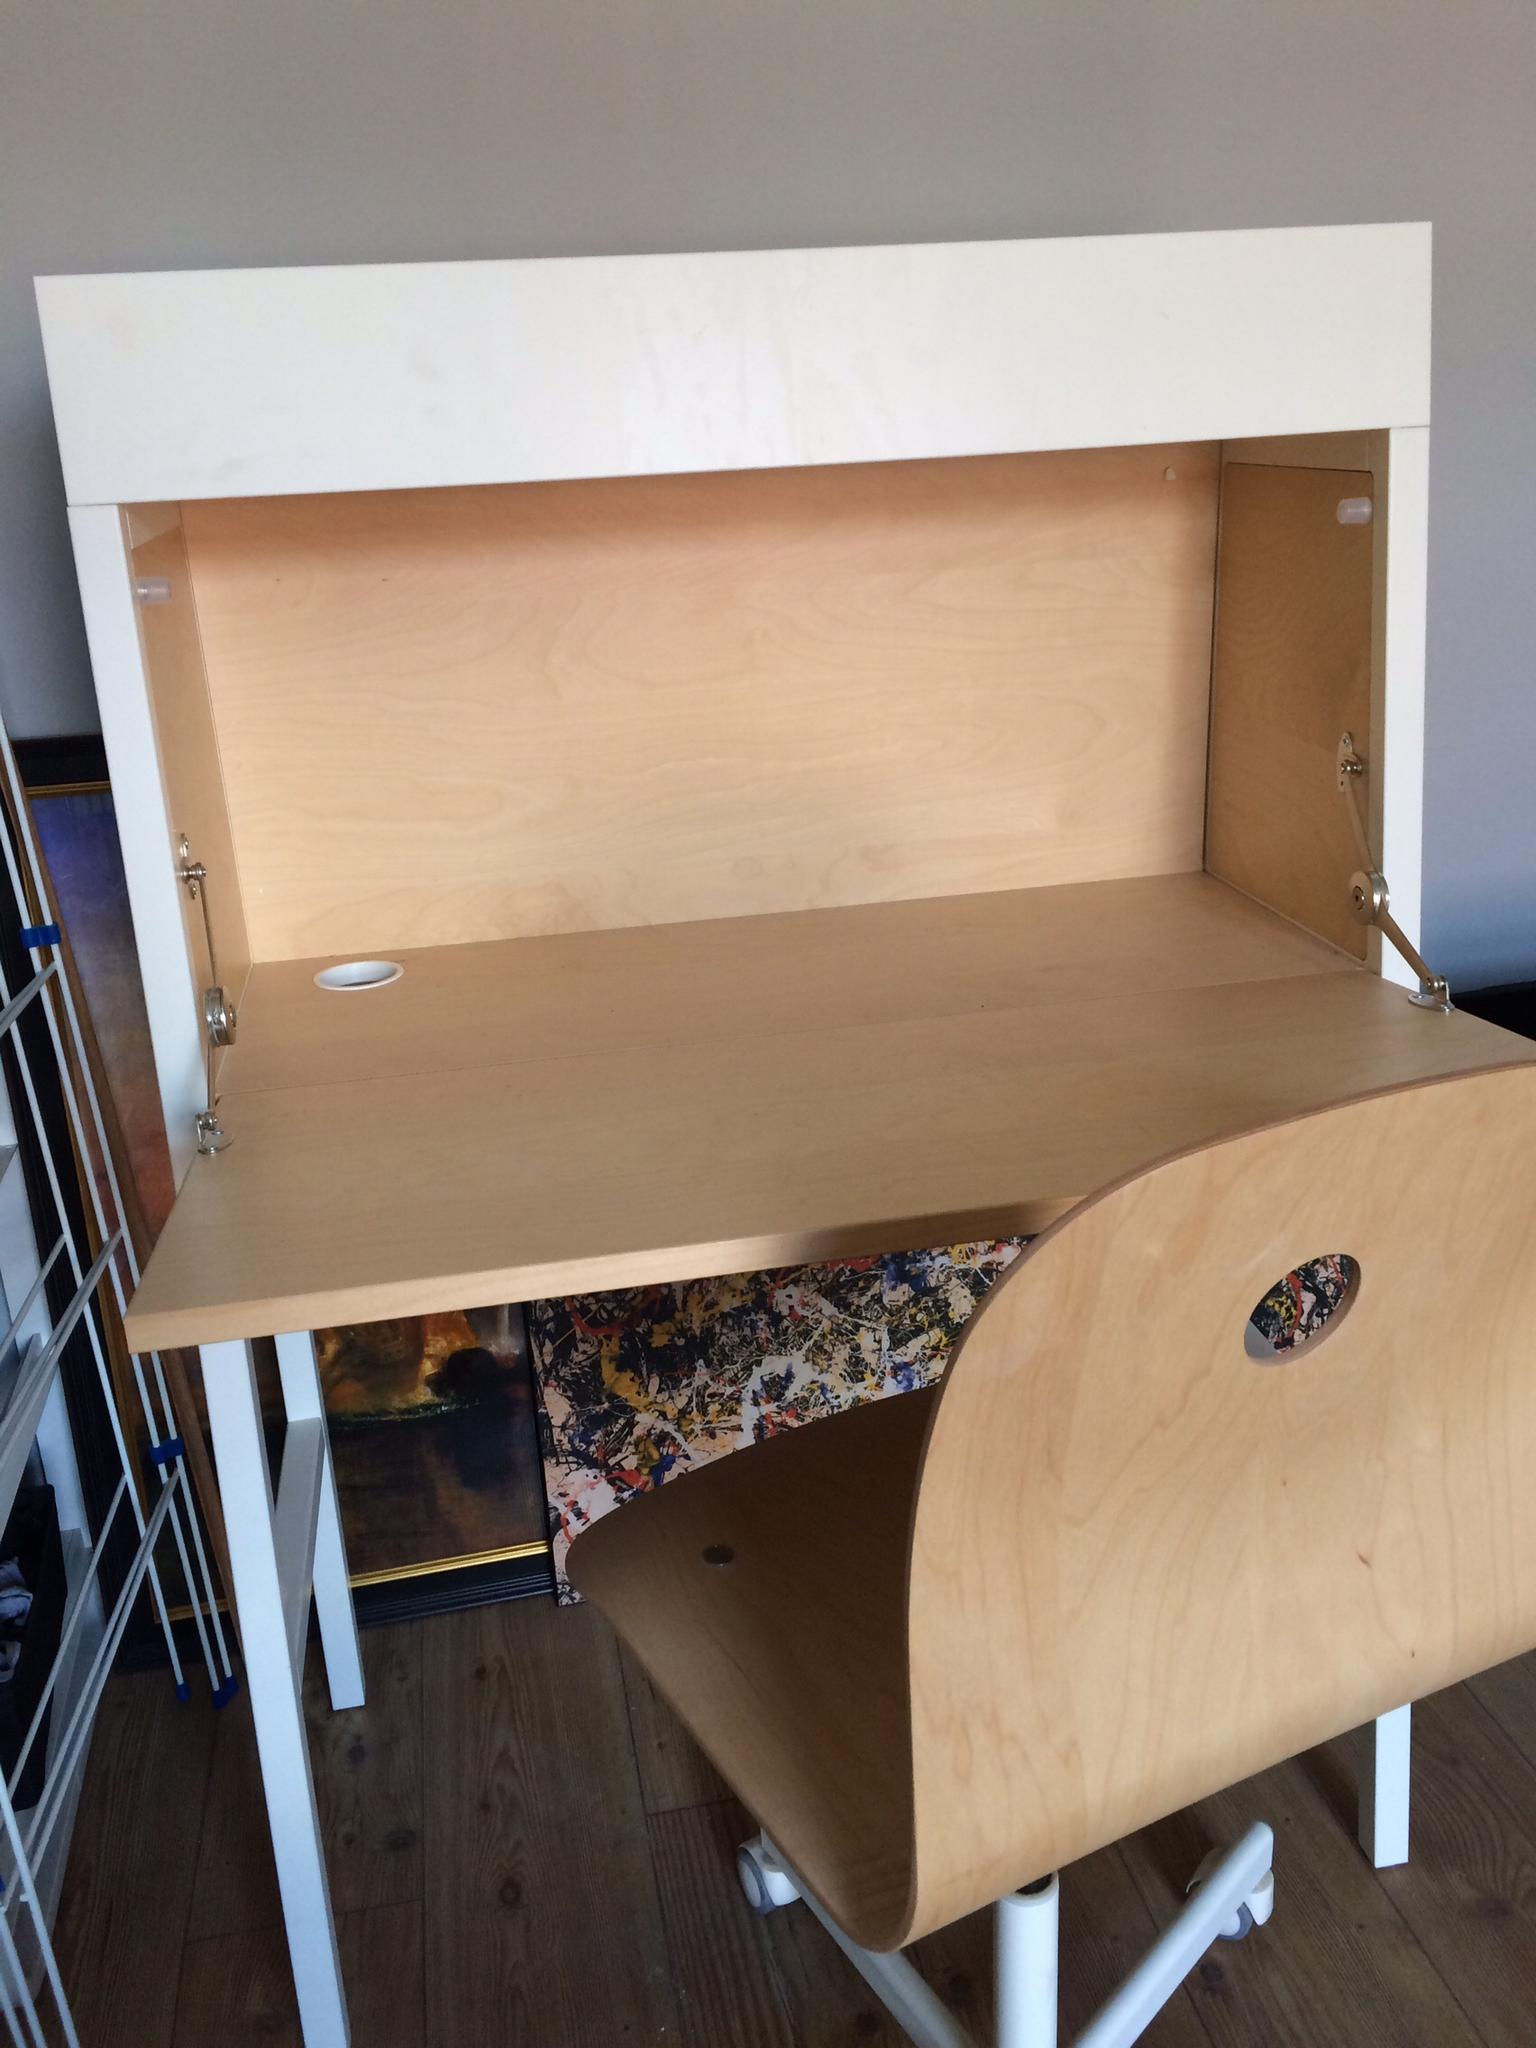 Ikea Computer Desk And Chair In Ls7 Leeds For 80 00 For Sale Shpock